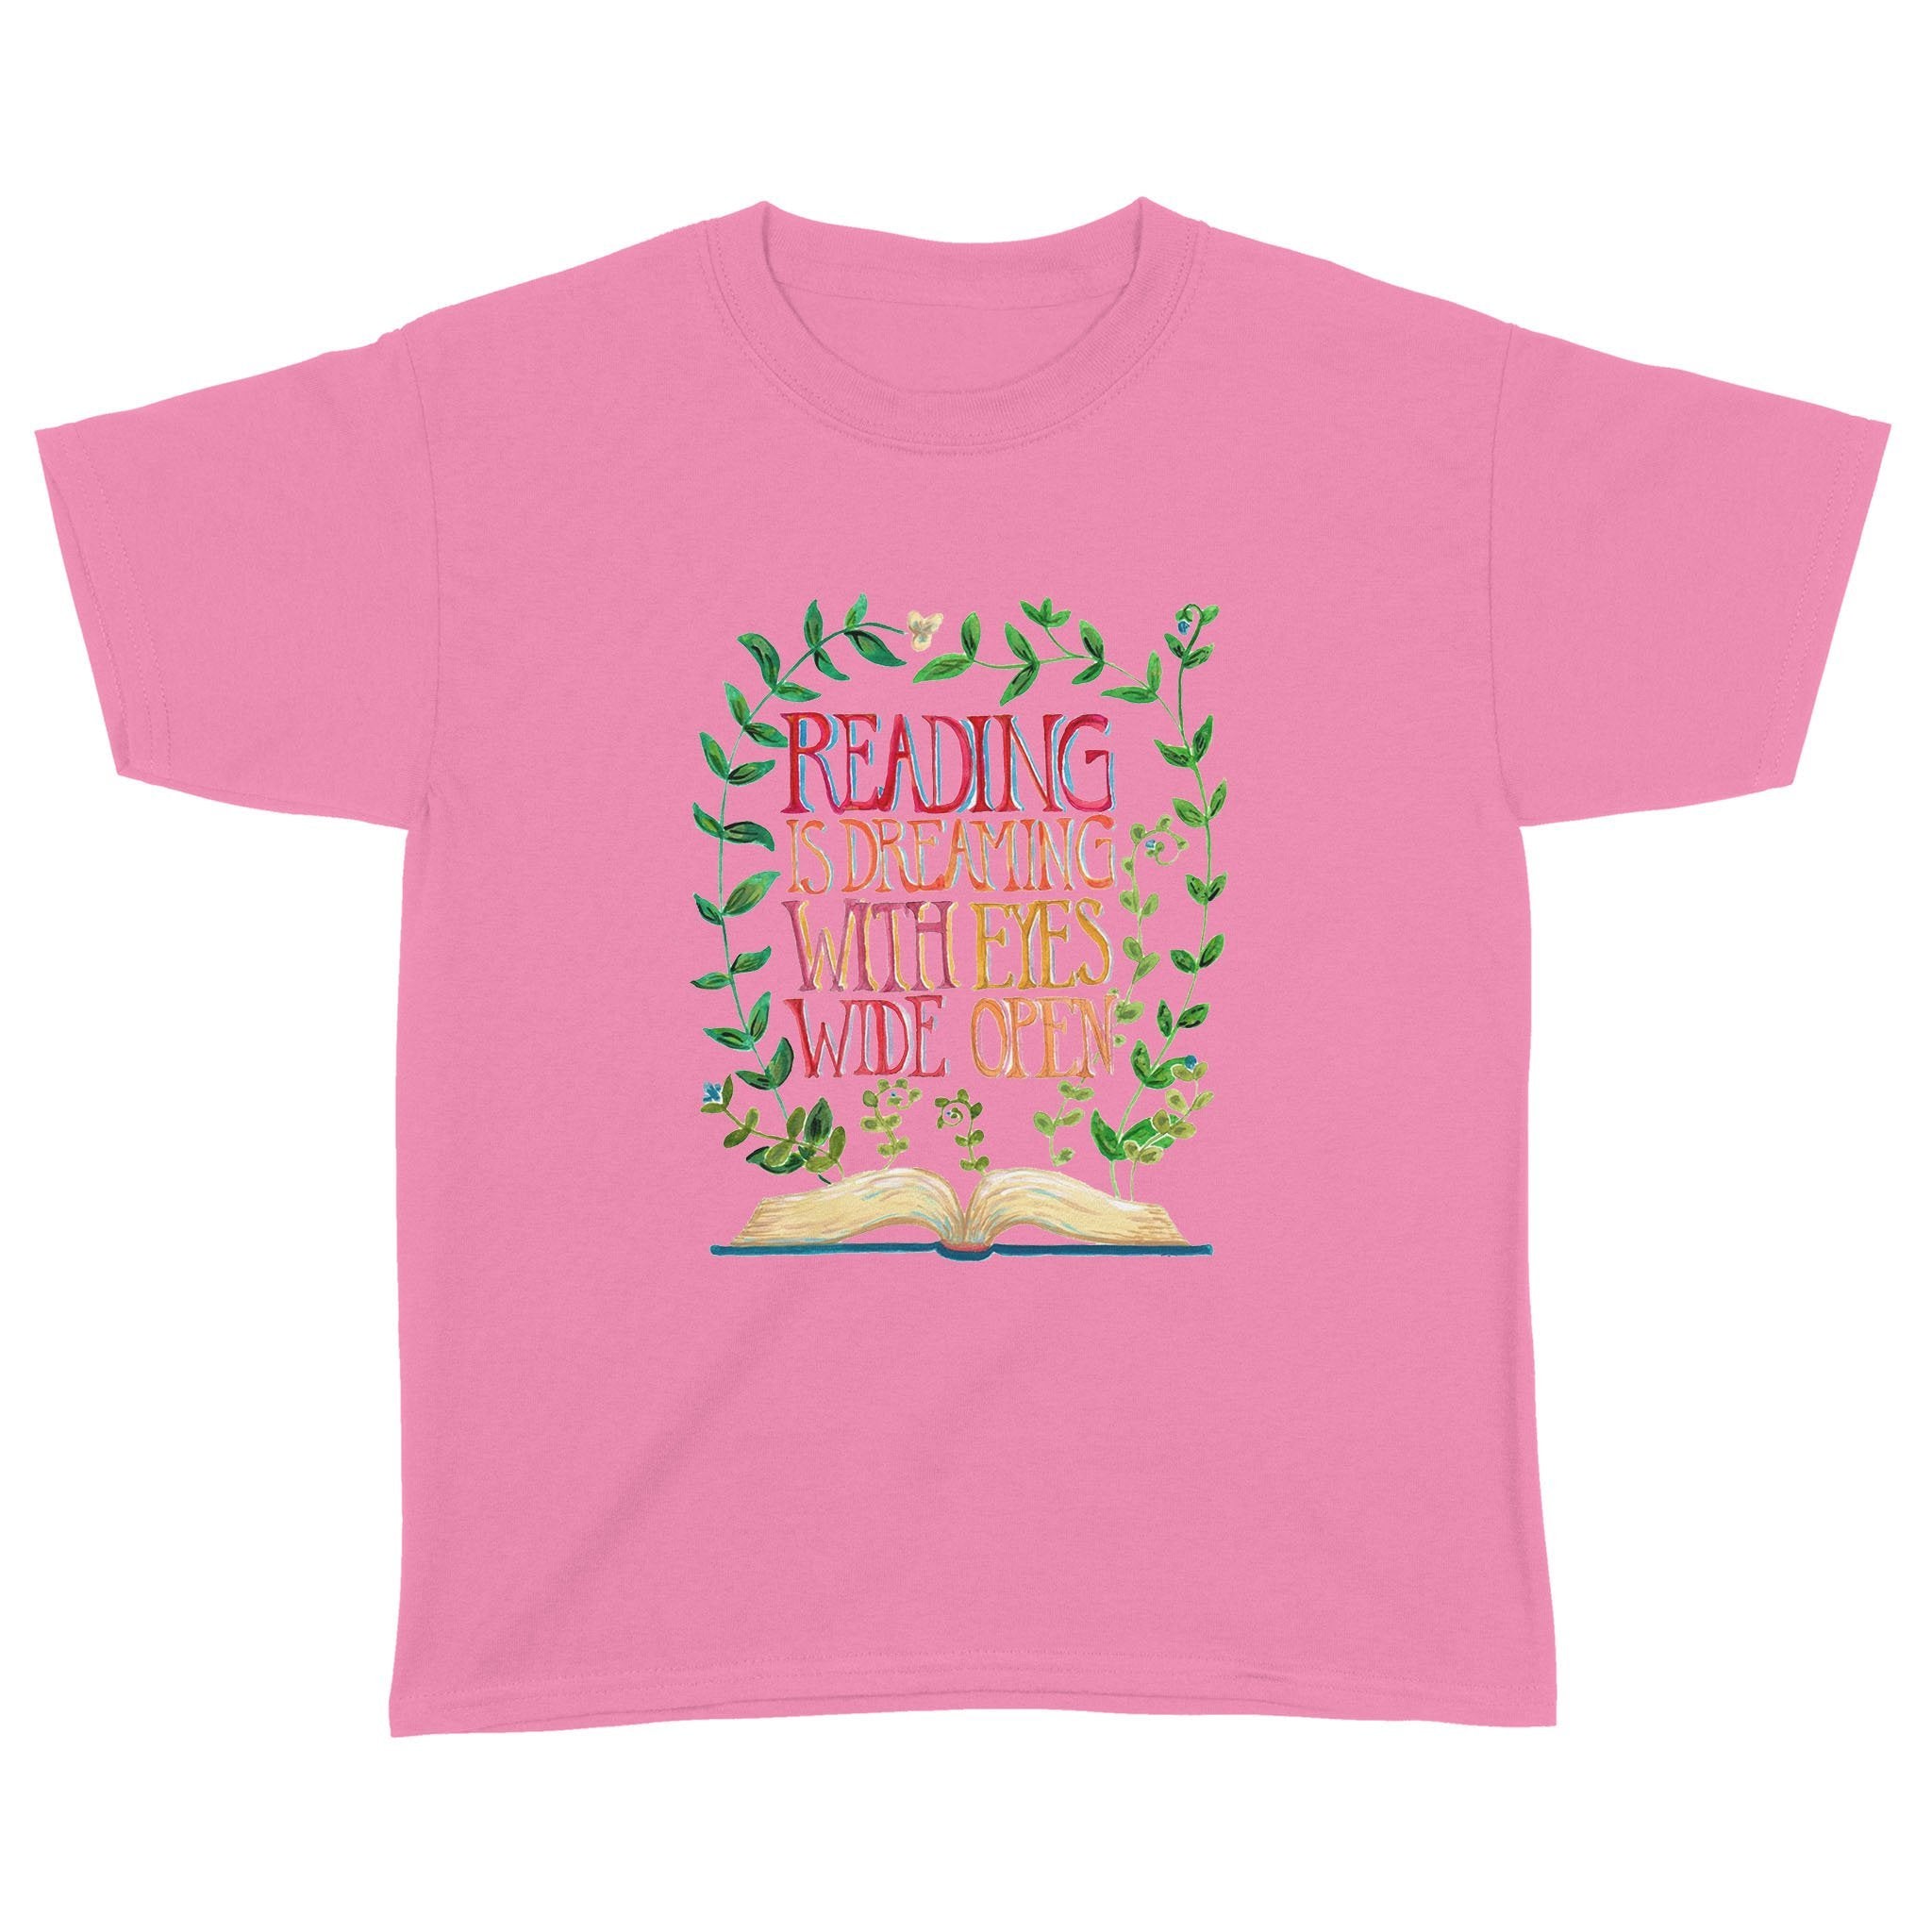 Reading Is Dreaming - Standard Youth T-shirt